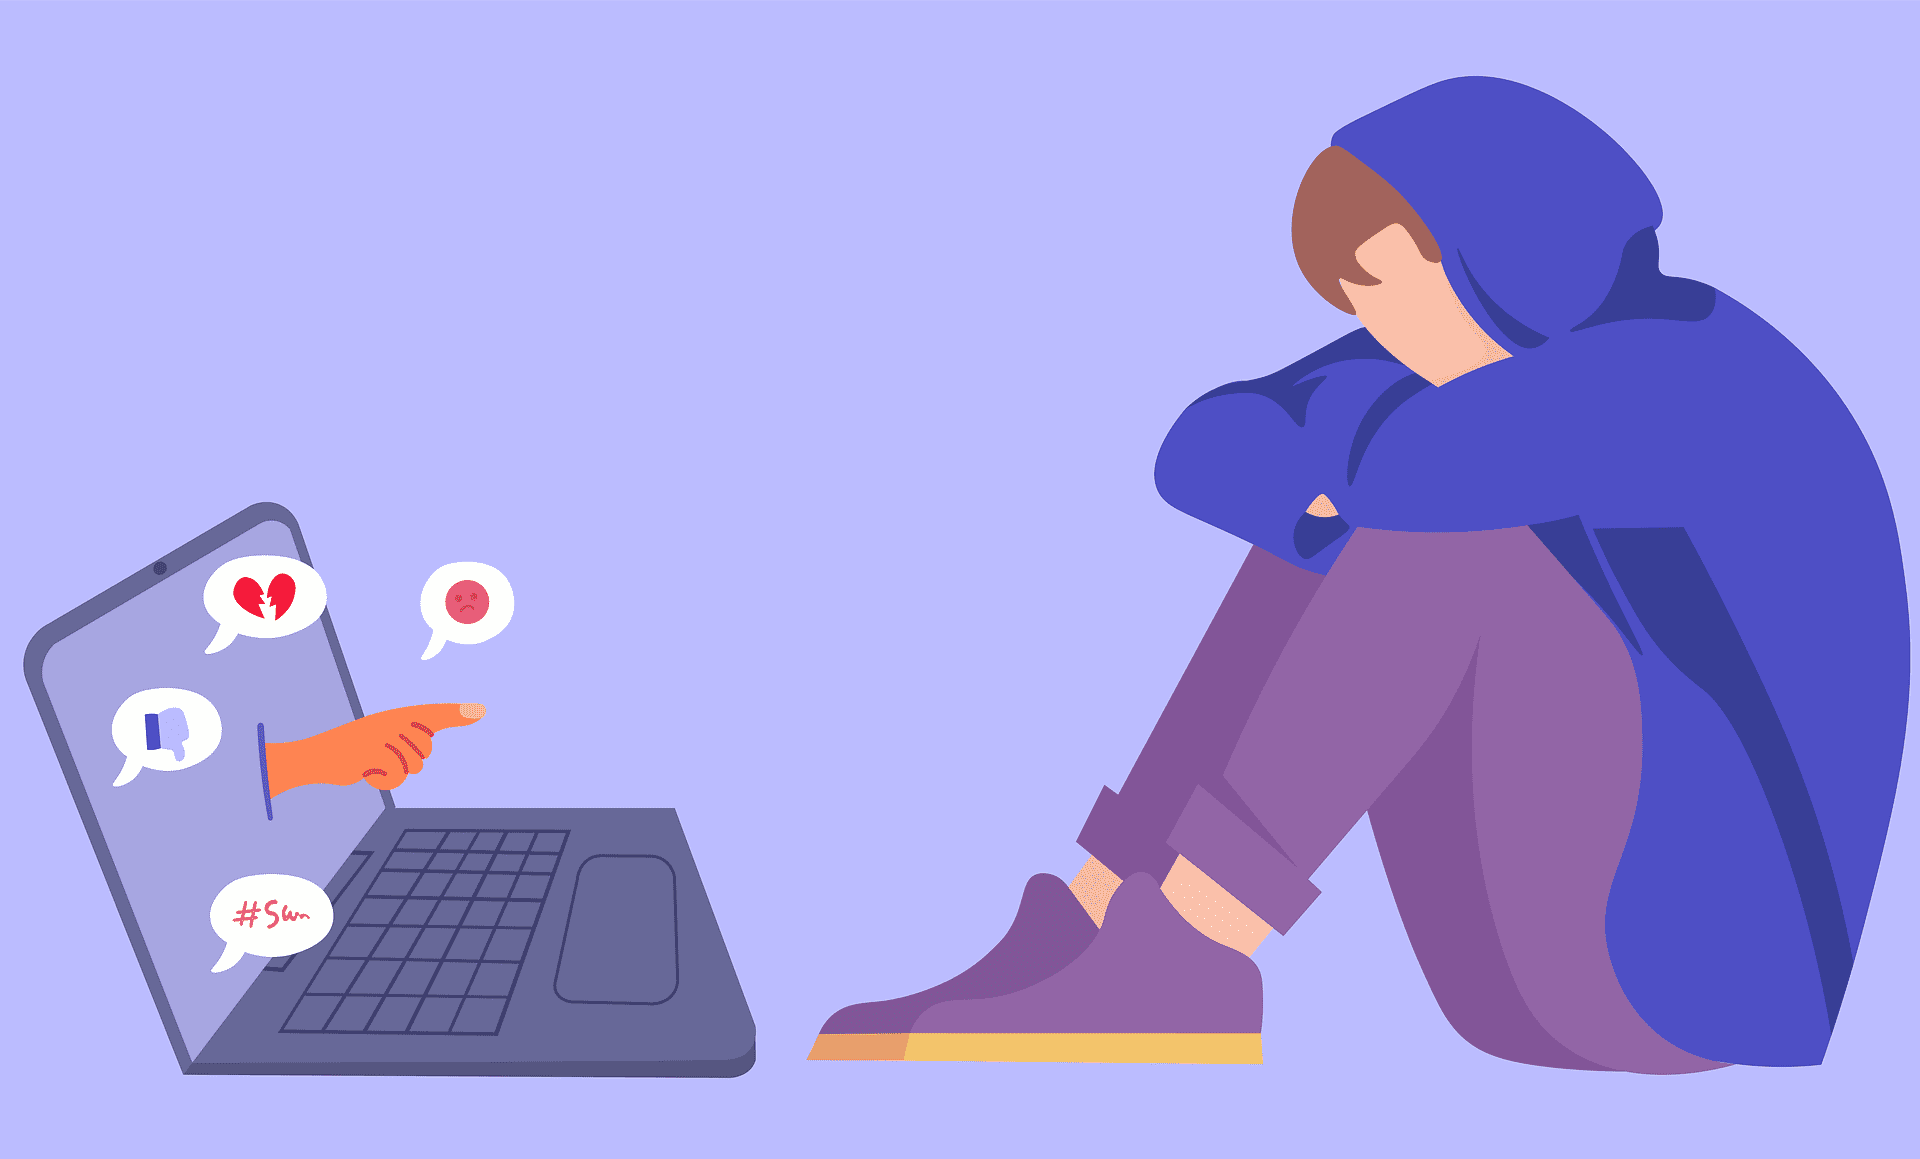 Illustration of a boy in a hoodie sitting next to a laptop with negative iconography related to cyberbullying